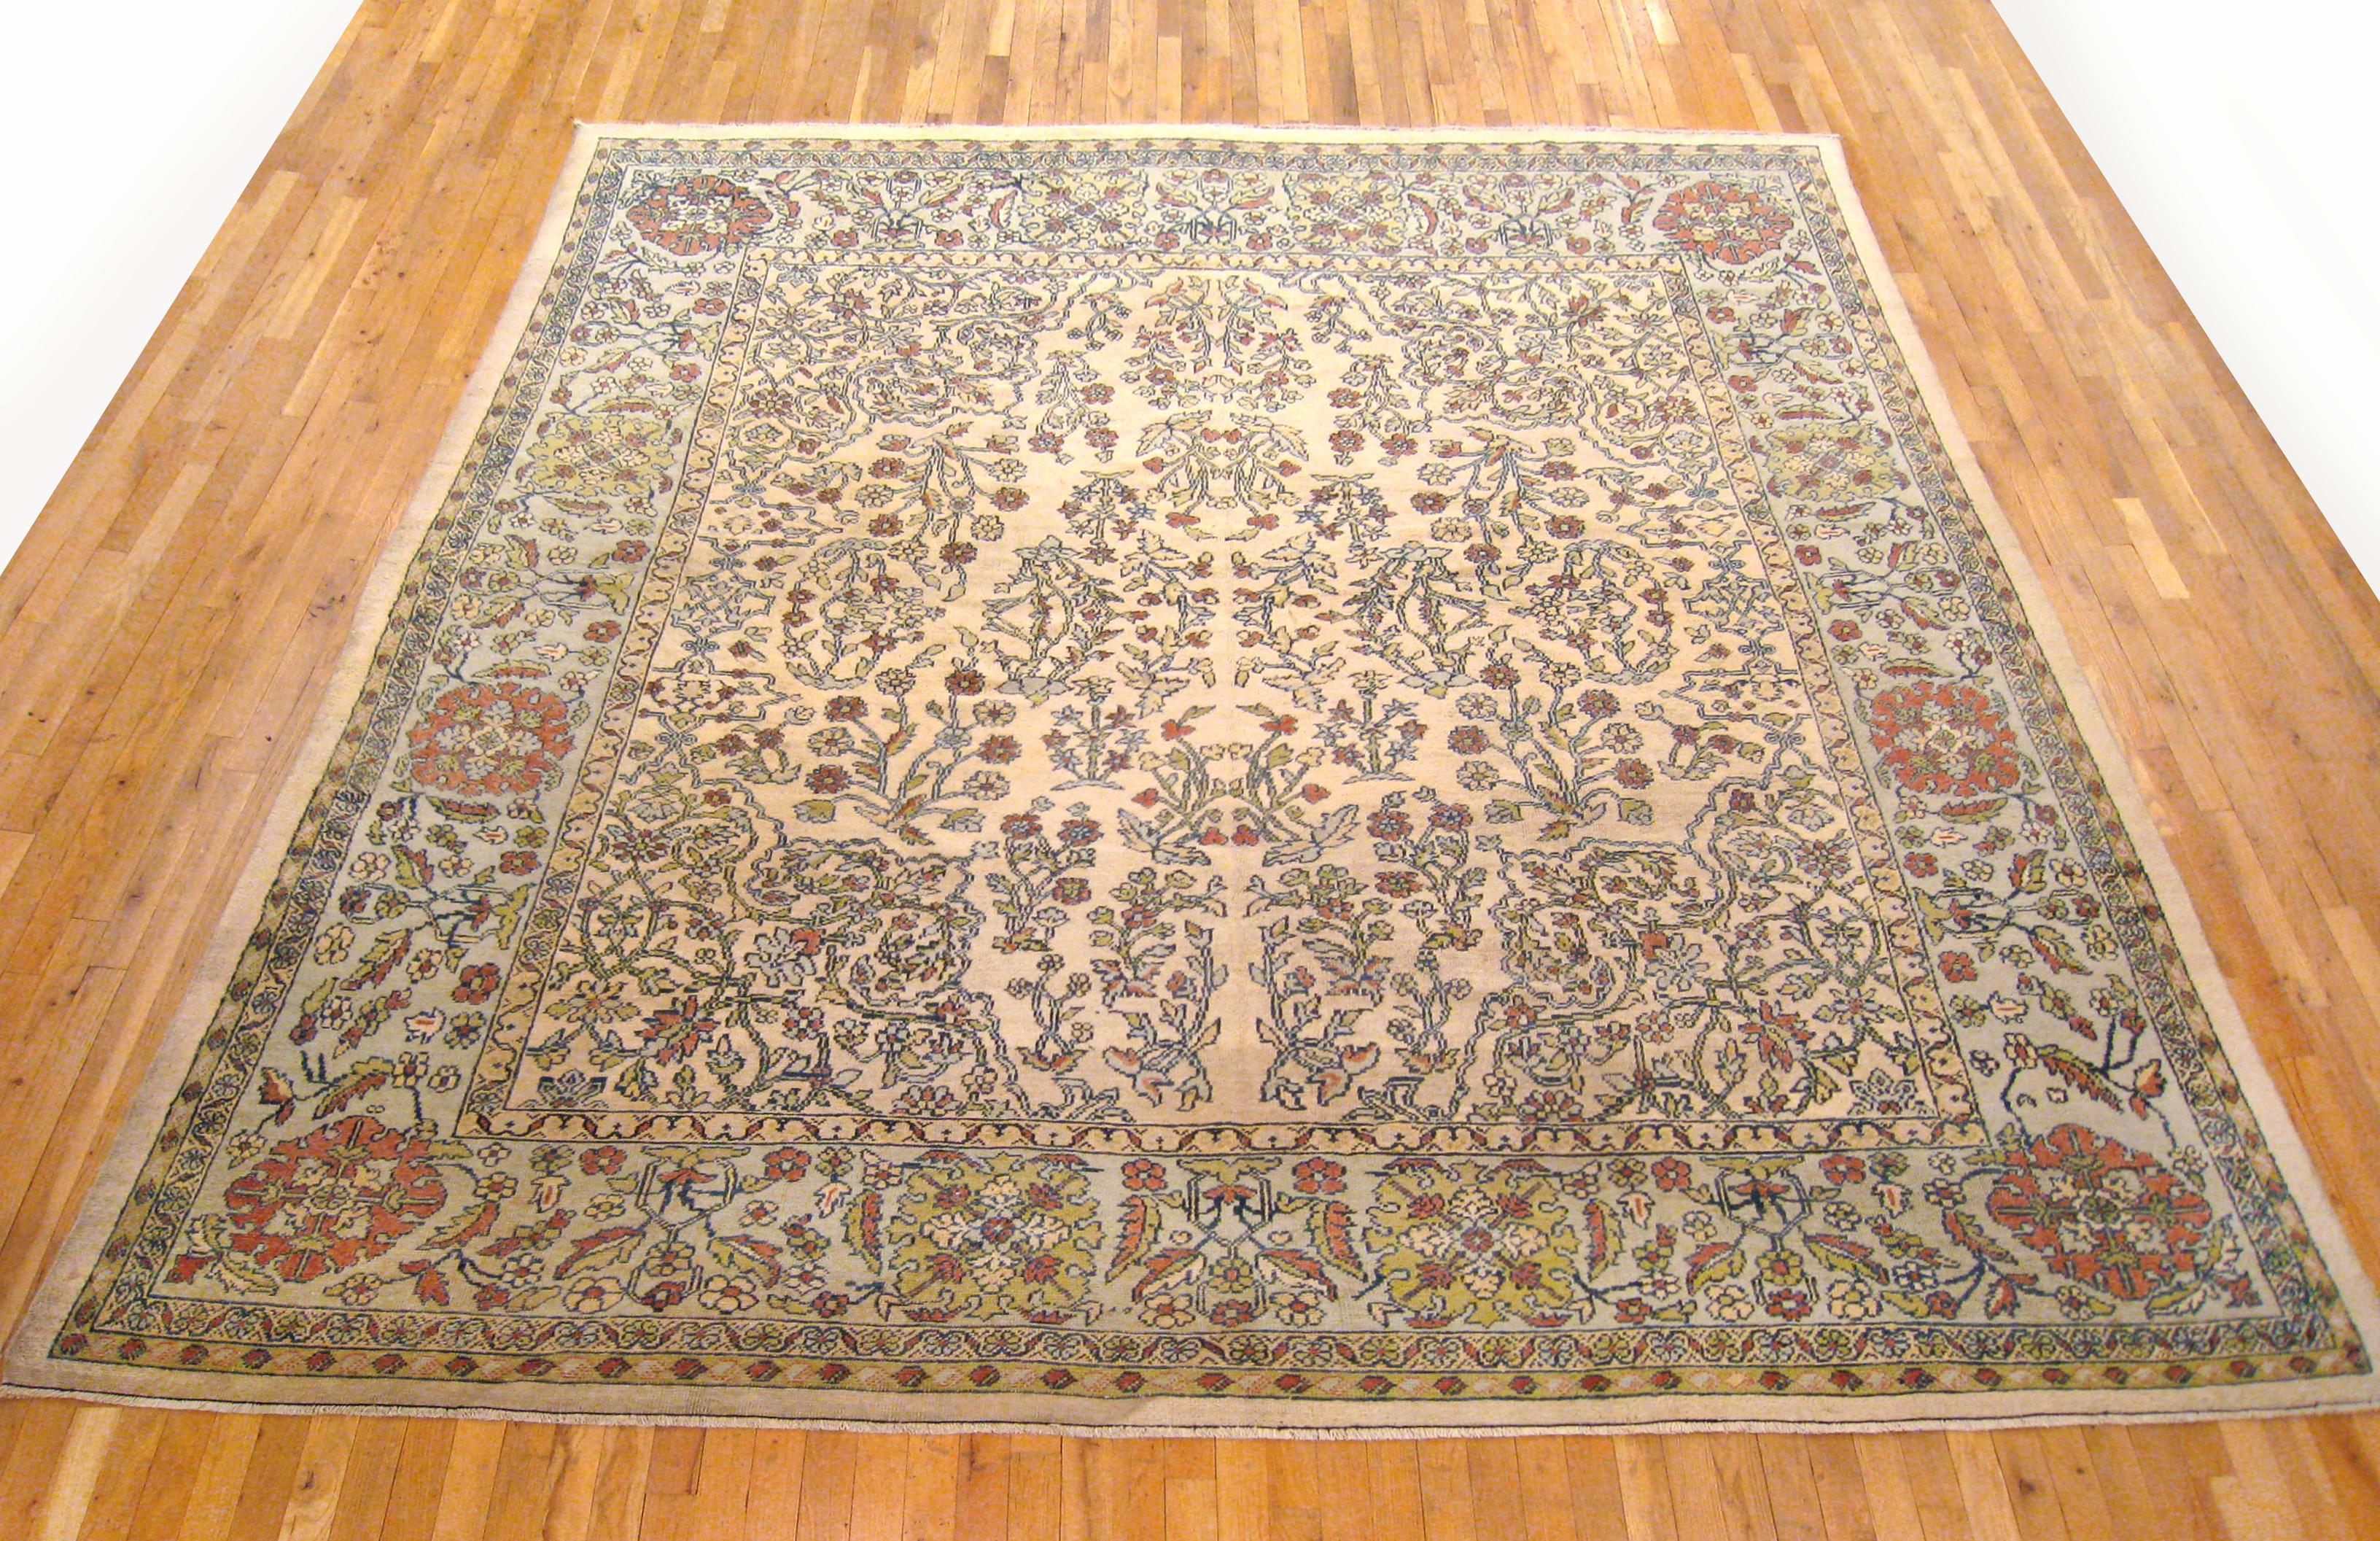 Antique Persian Sultanabad rug, Room size, circa 1910

A one-of-a-kind antique Persian Sultanabad oriental carpet with a thick and lustrous wool pile, knotted by hand, with soft touch and great resistance to wear. This carpet features floral